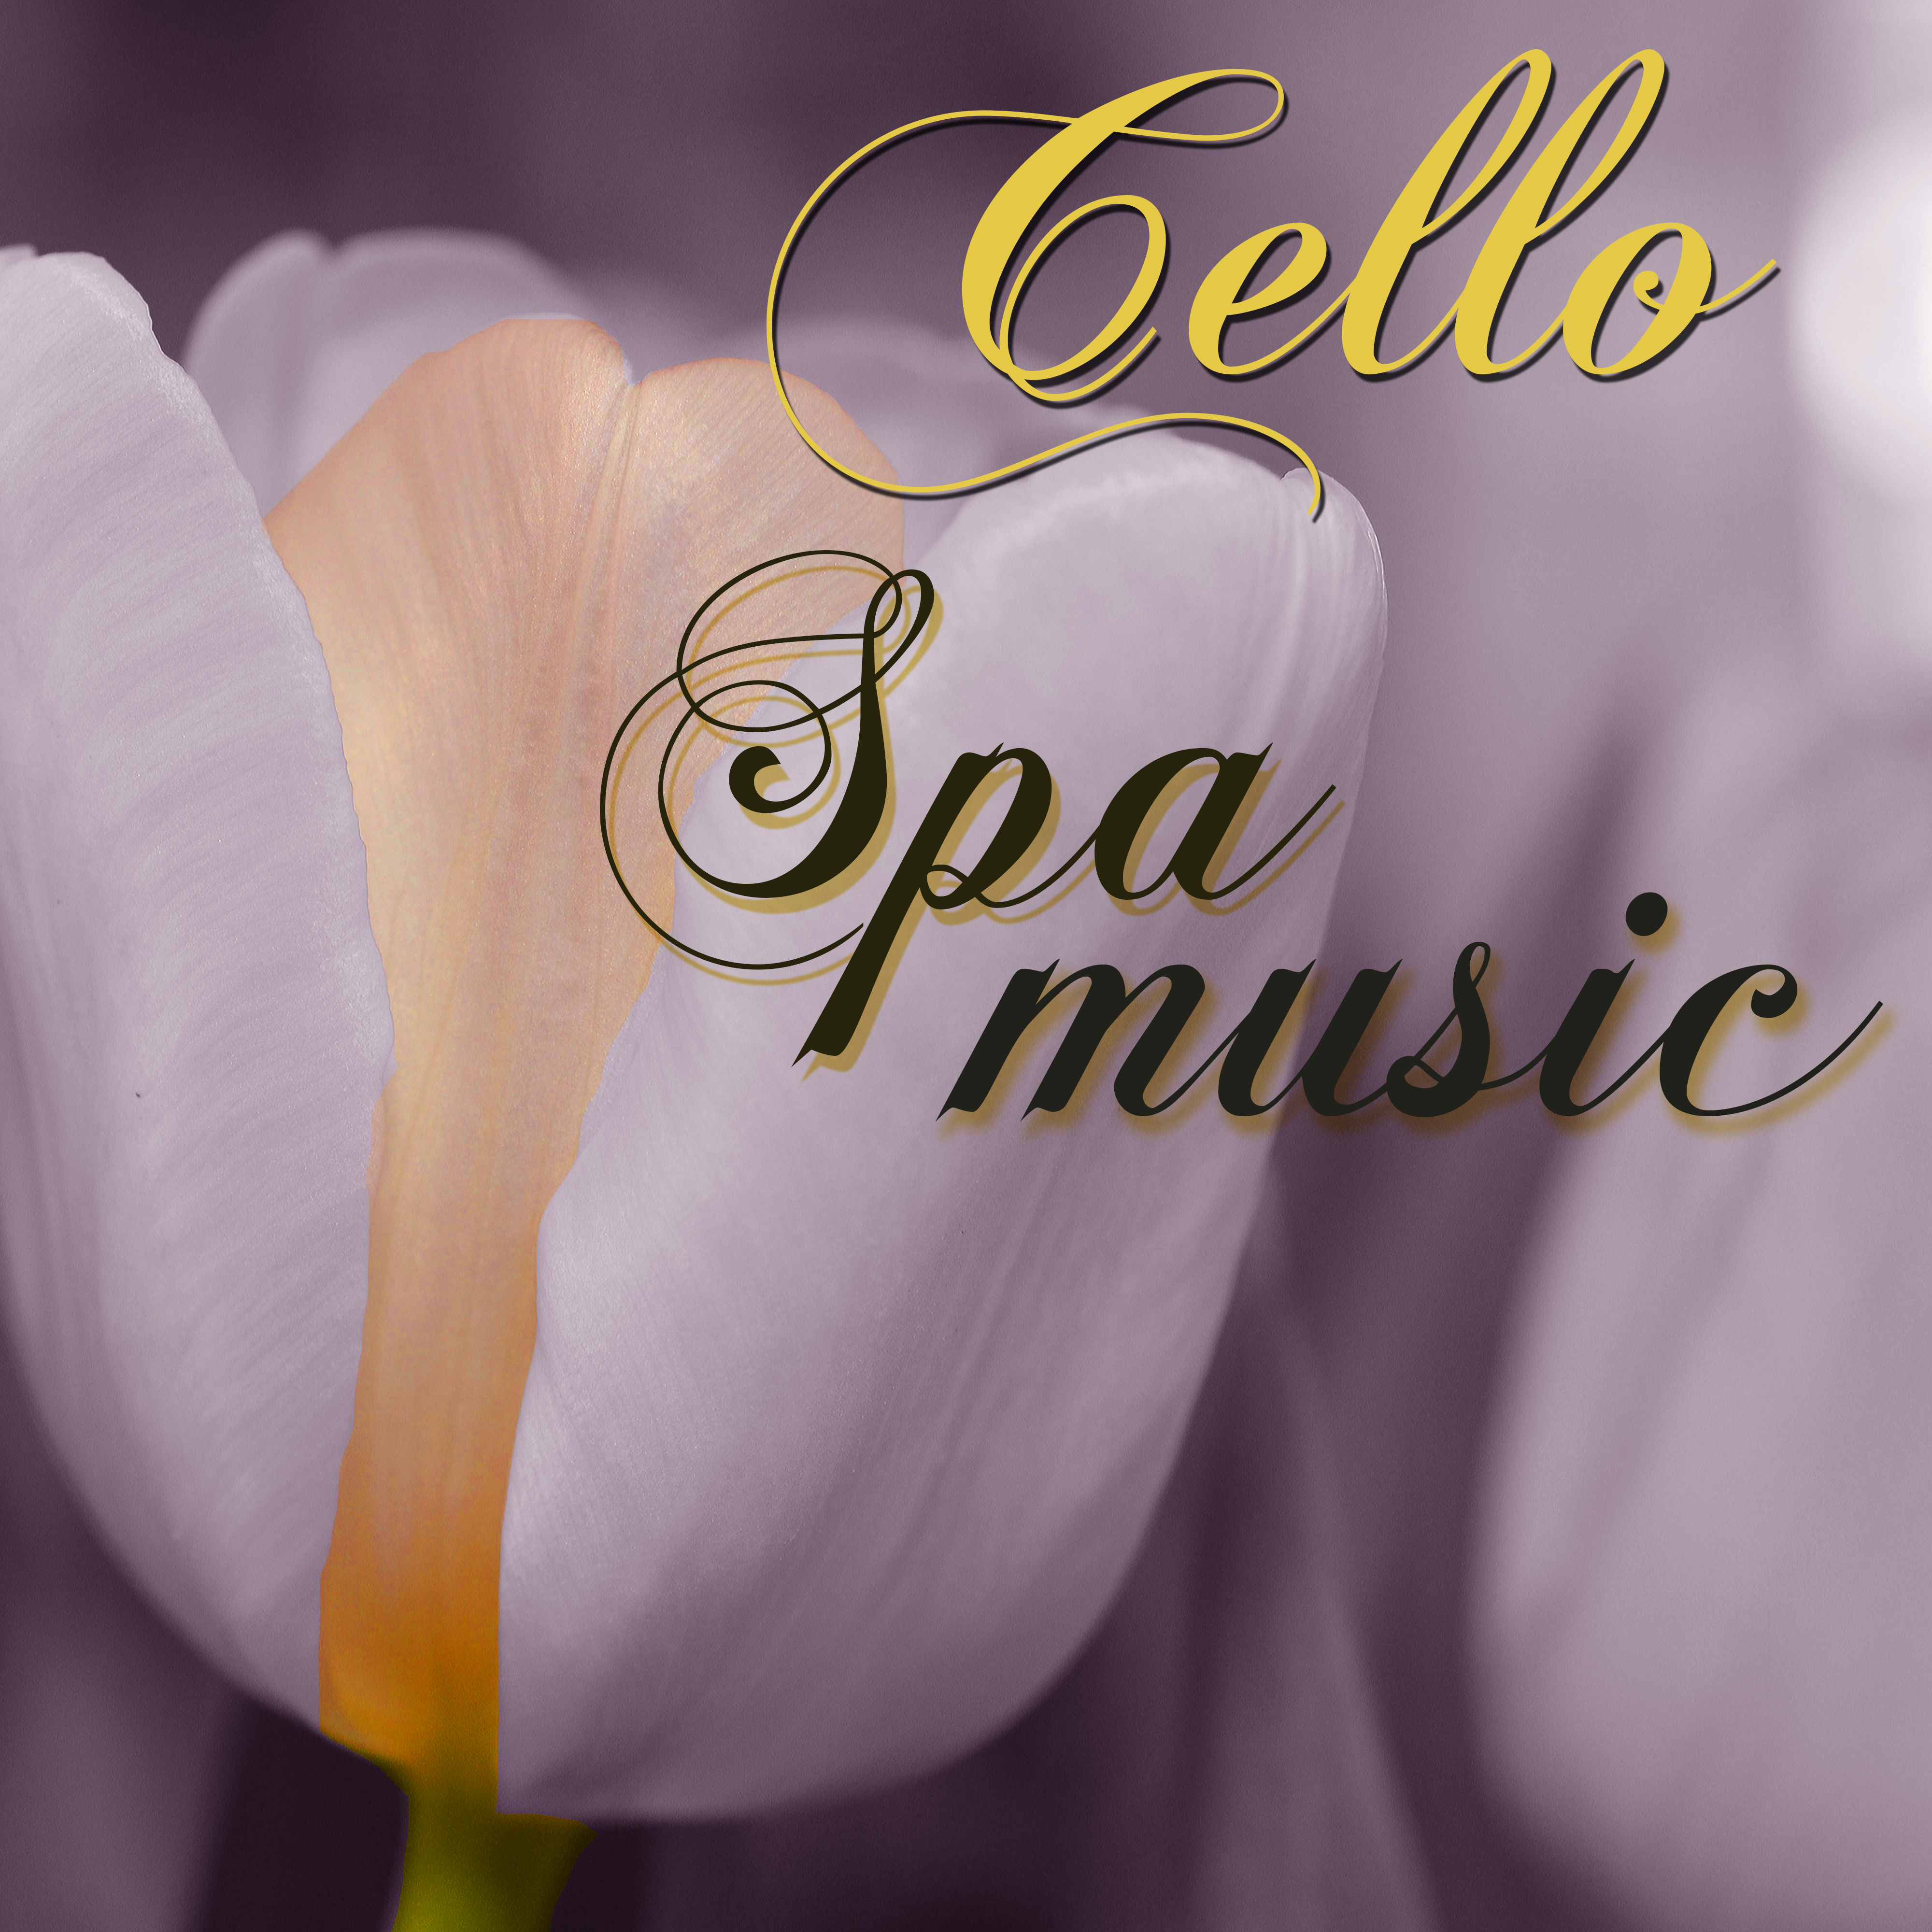 Cello Spa Music  Soothing Spa Sounds for Massage  Healthy Body Wellness Center